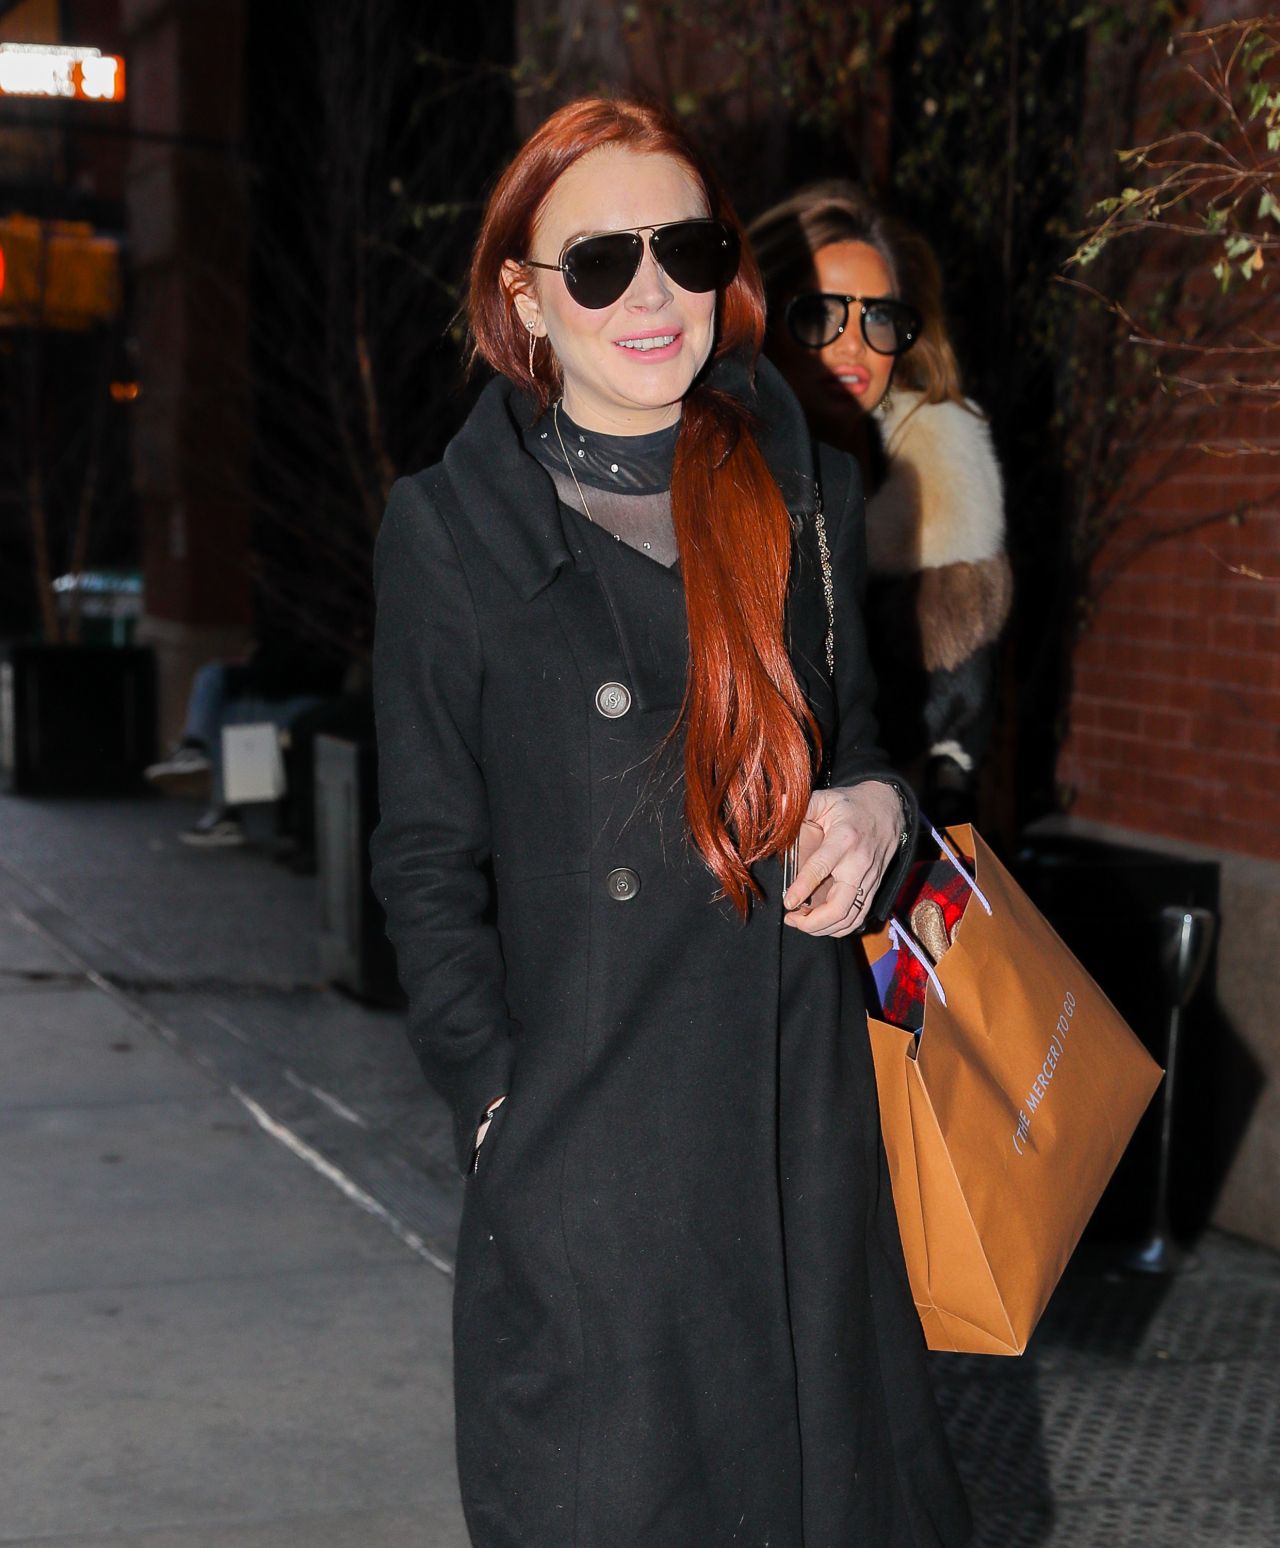 lindsay-lohan-night-out-in-new-york-01-02-2019-1.jpg